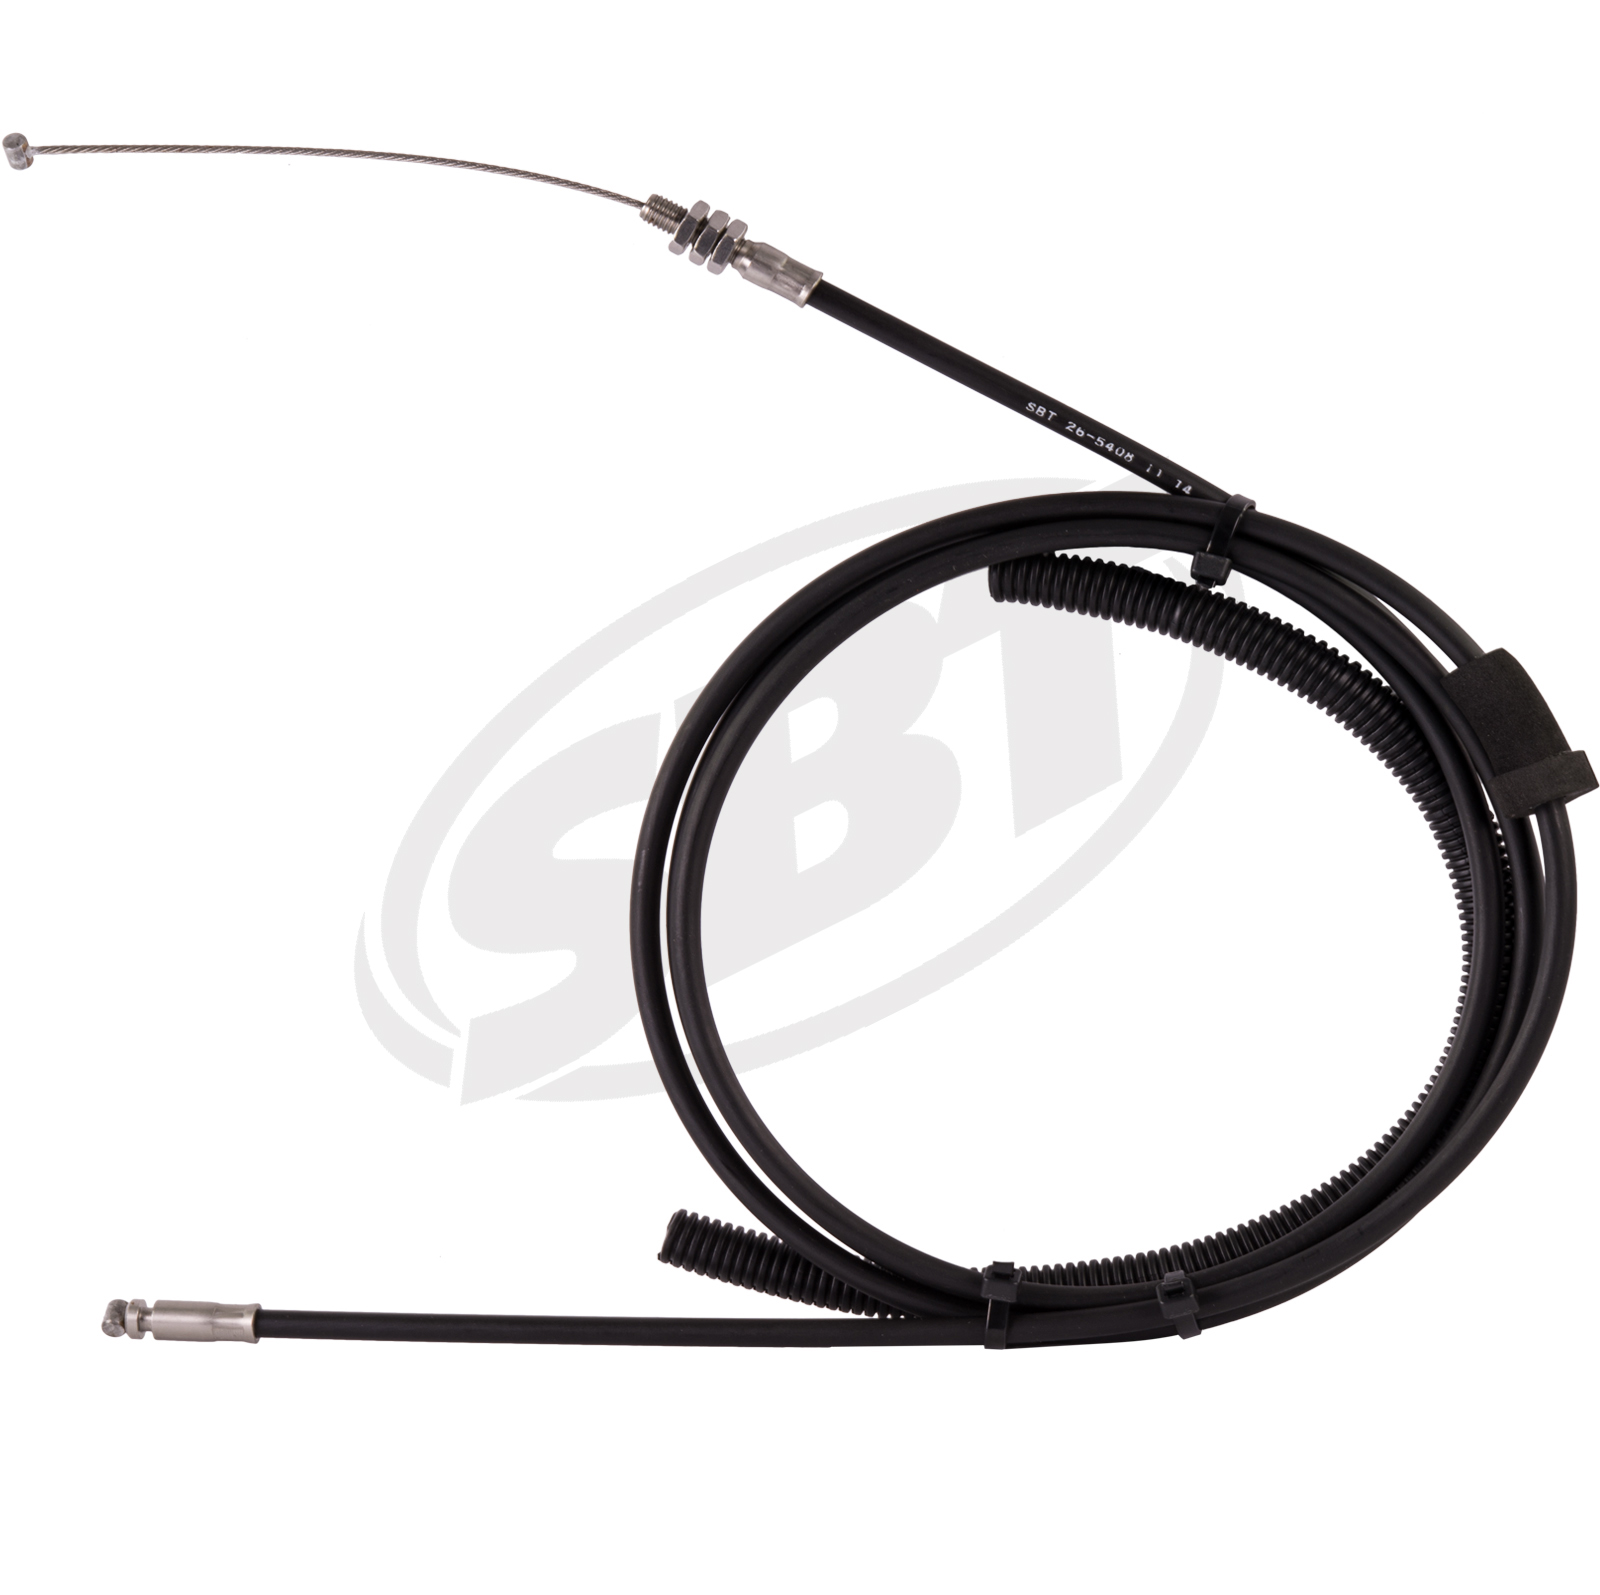 Trim Cable for Yamaha FX 140 /FX 1100 /FX HO /FX Cruiser HO F1B-U153D-01-00  2002-2007 2 required